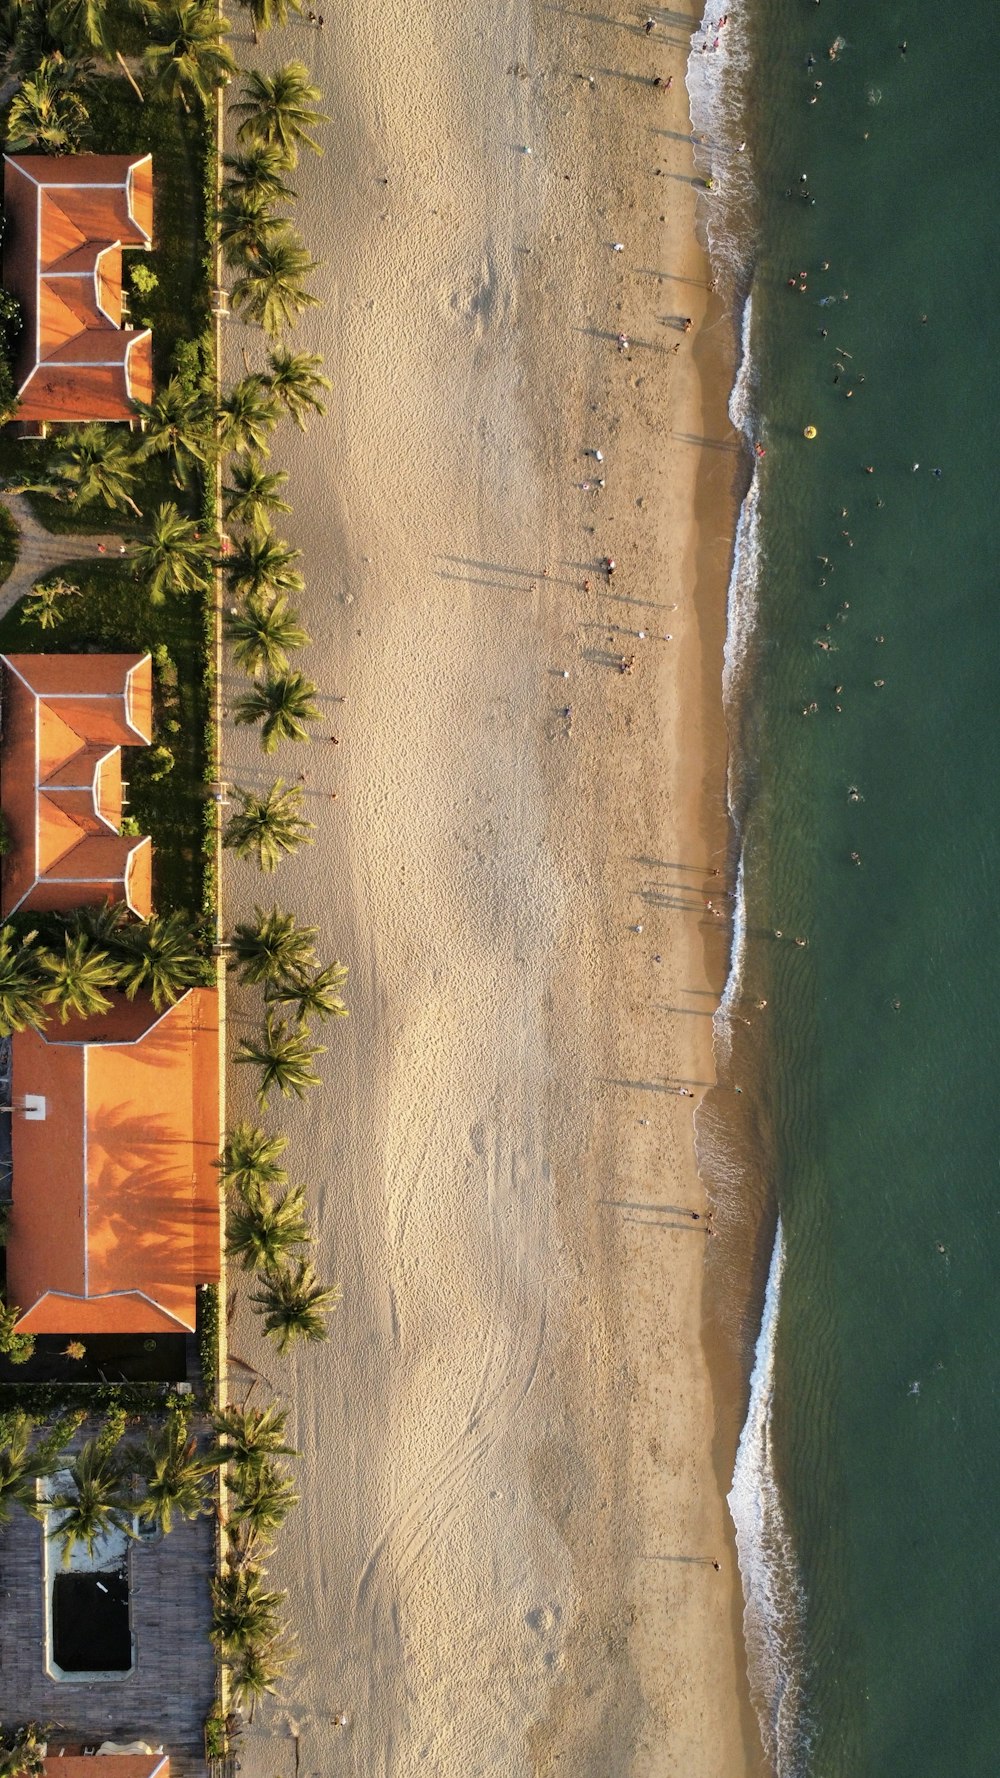 an aerial view of a beach with umbrellas and palm trees